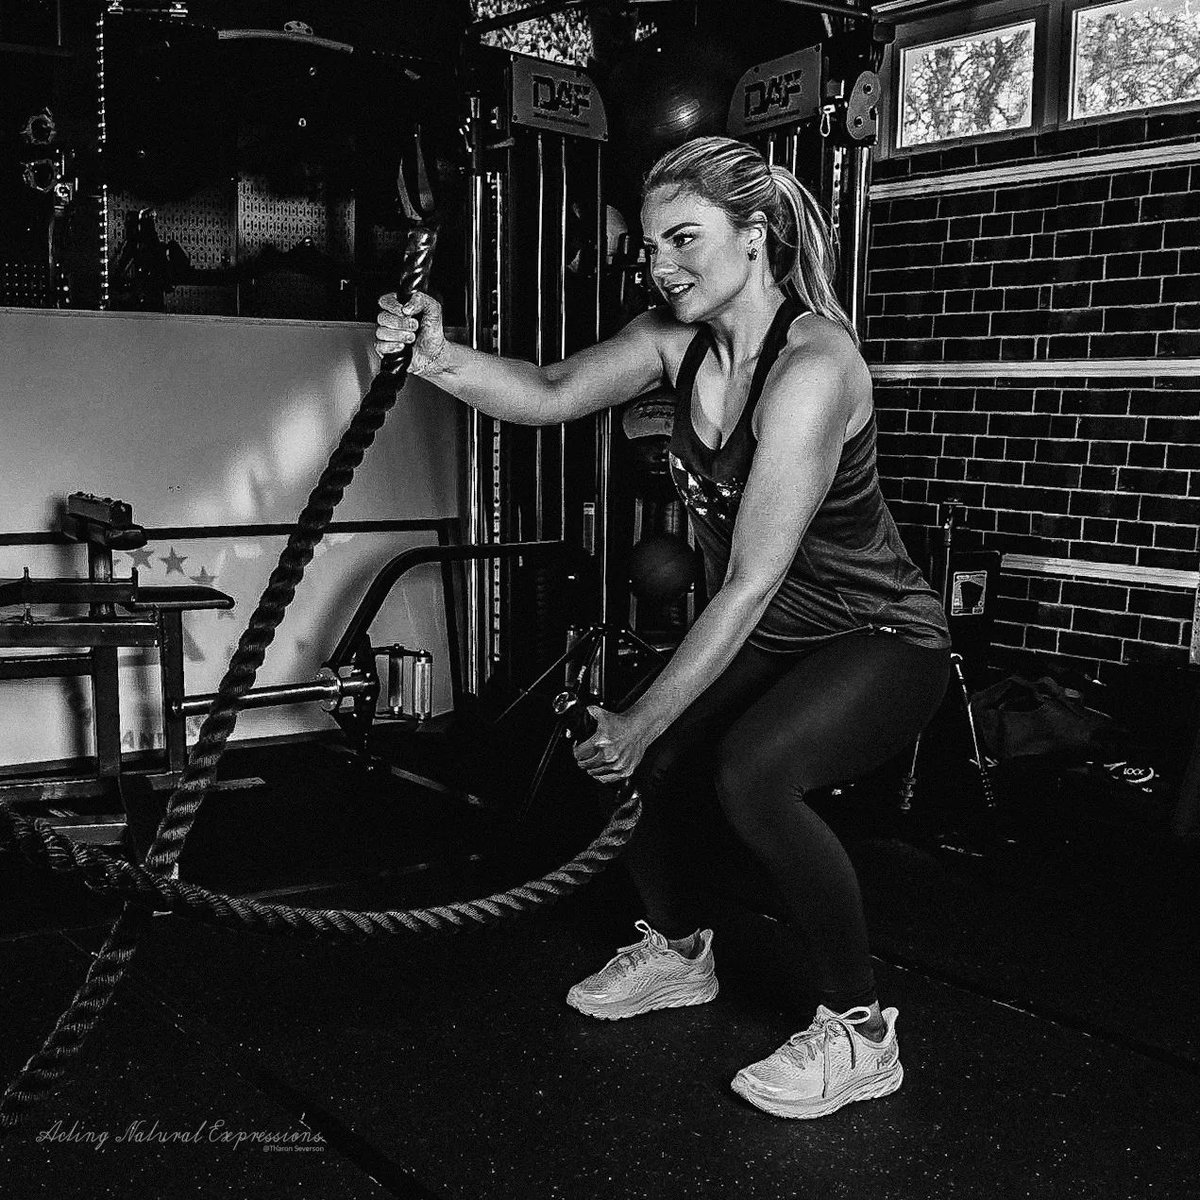 A little bit of summer is what the whole year is about.
.
.
actingnaturalbytharon #fitnessphotography #fitness #fitness_portrait #gym #blackandwhite #bnw_portrait #bnw_life_shots #bnw_world #bnw